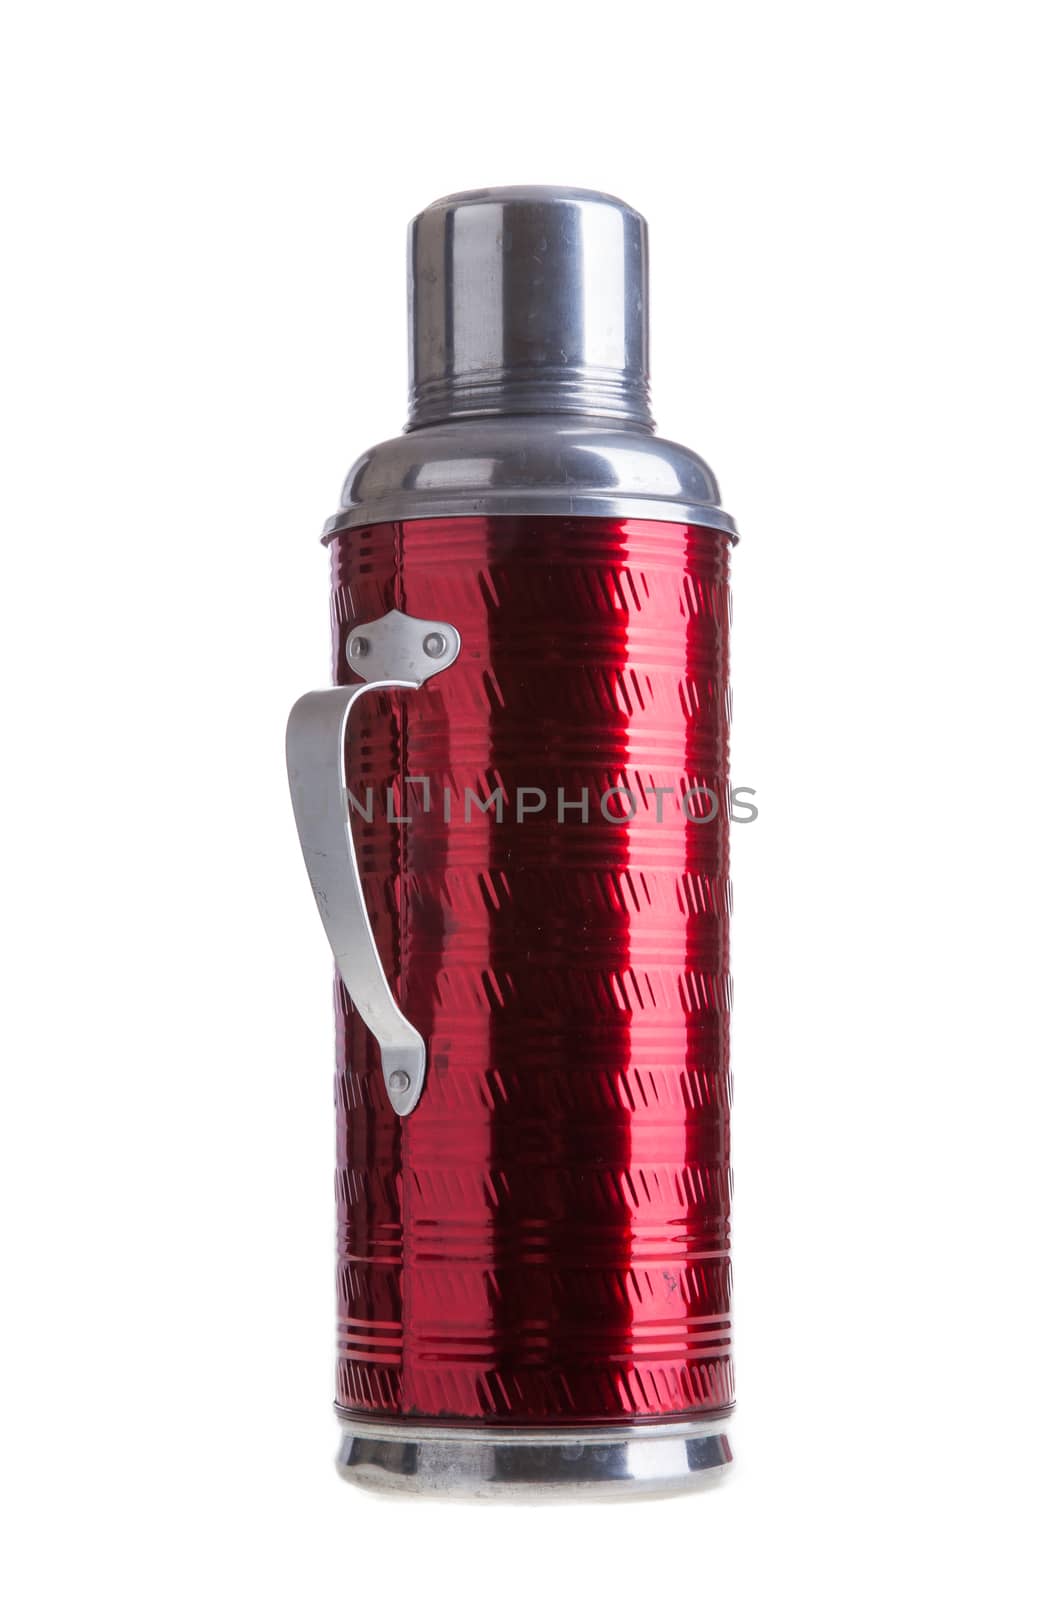 Thermo flask by tehcheesiong